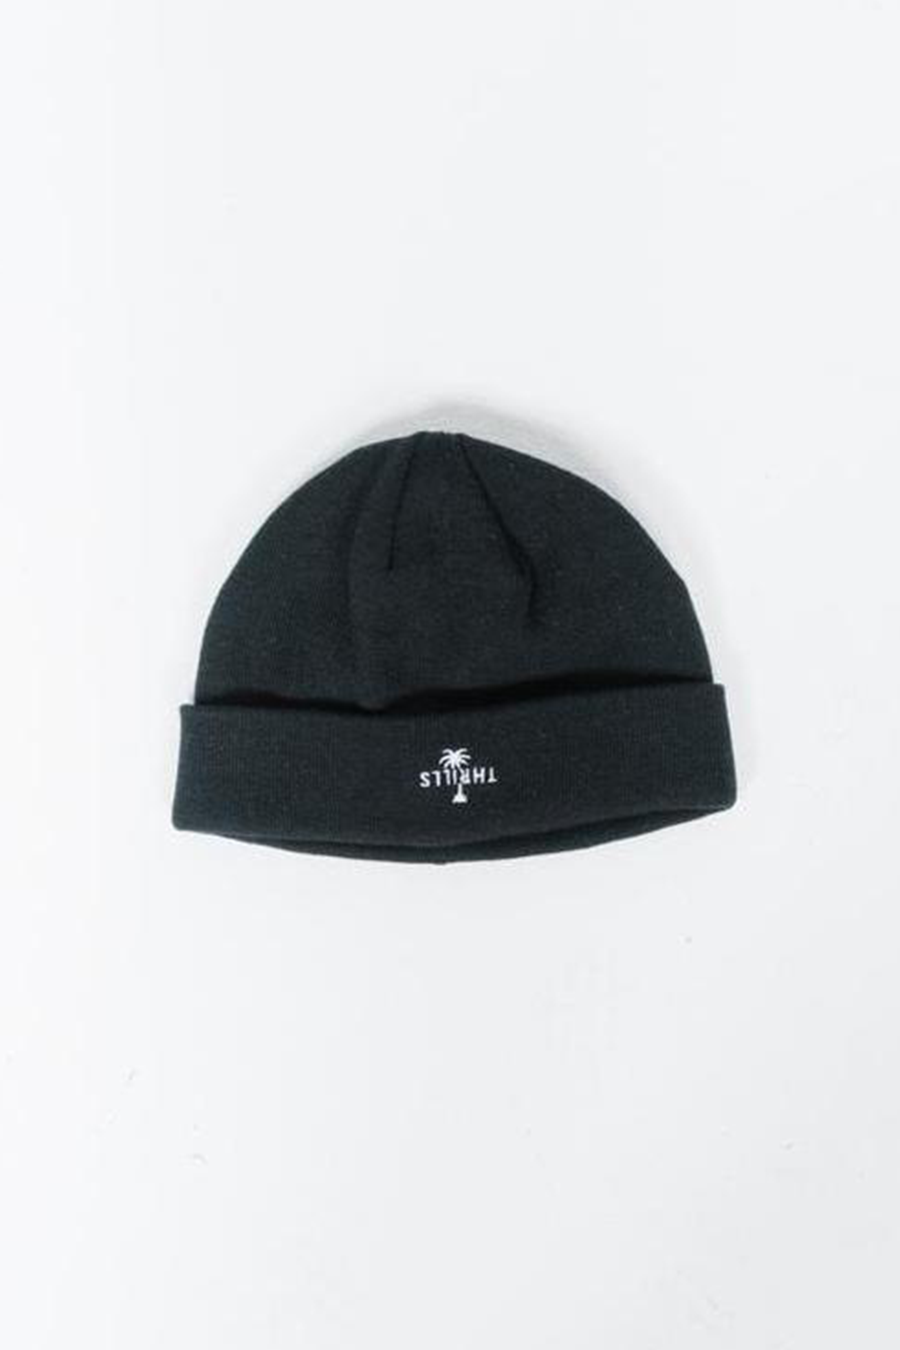 Palm Beanie | Black - Main Image Number 1 of 1